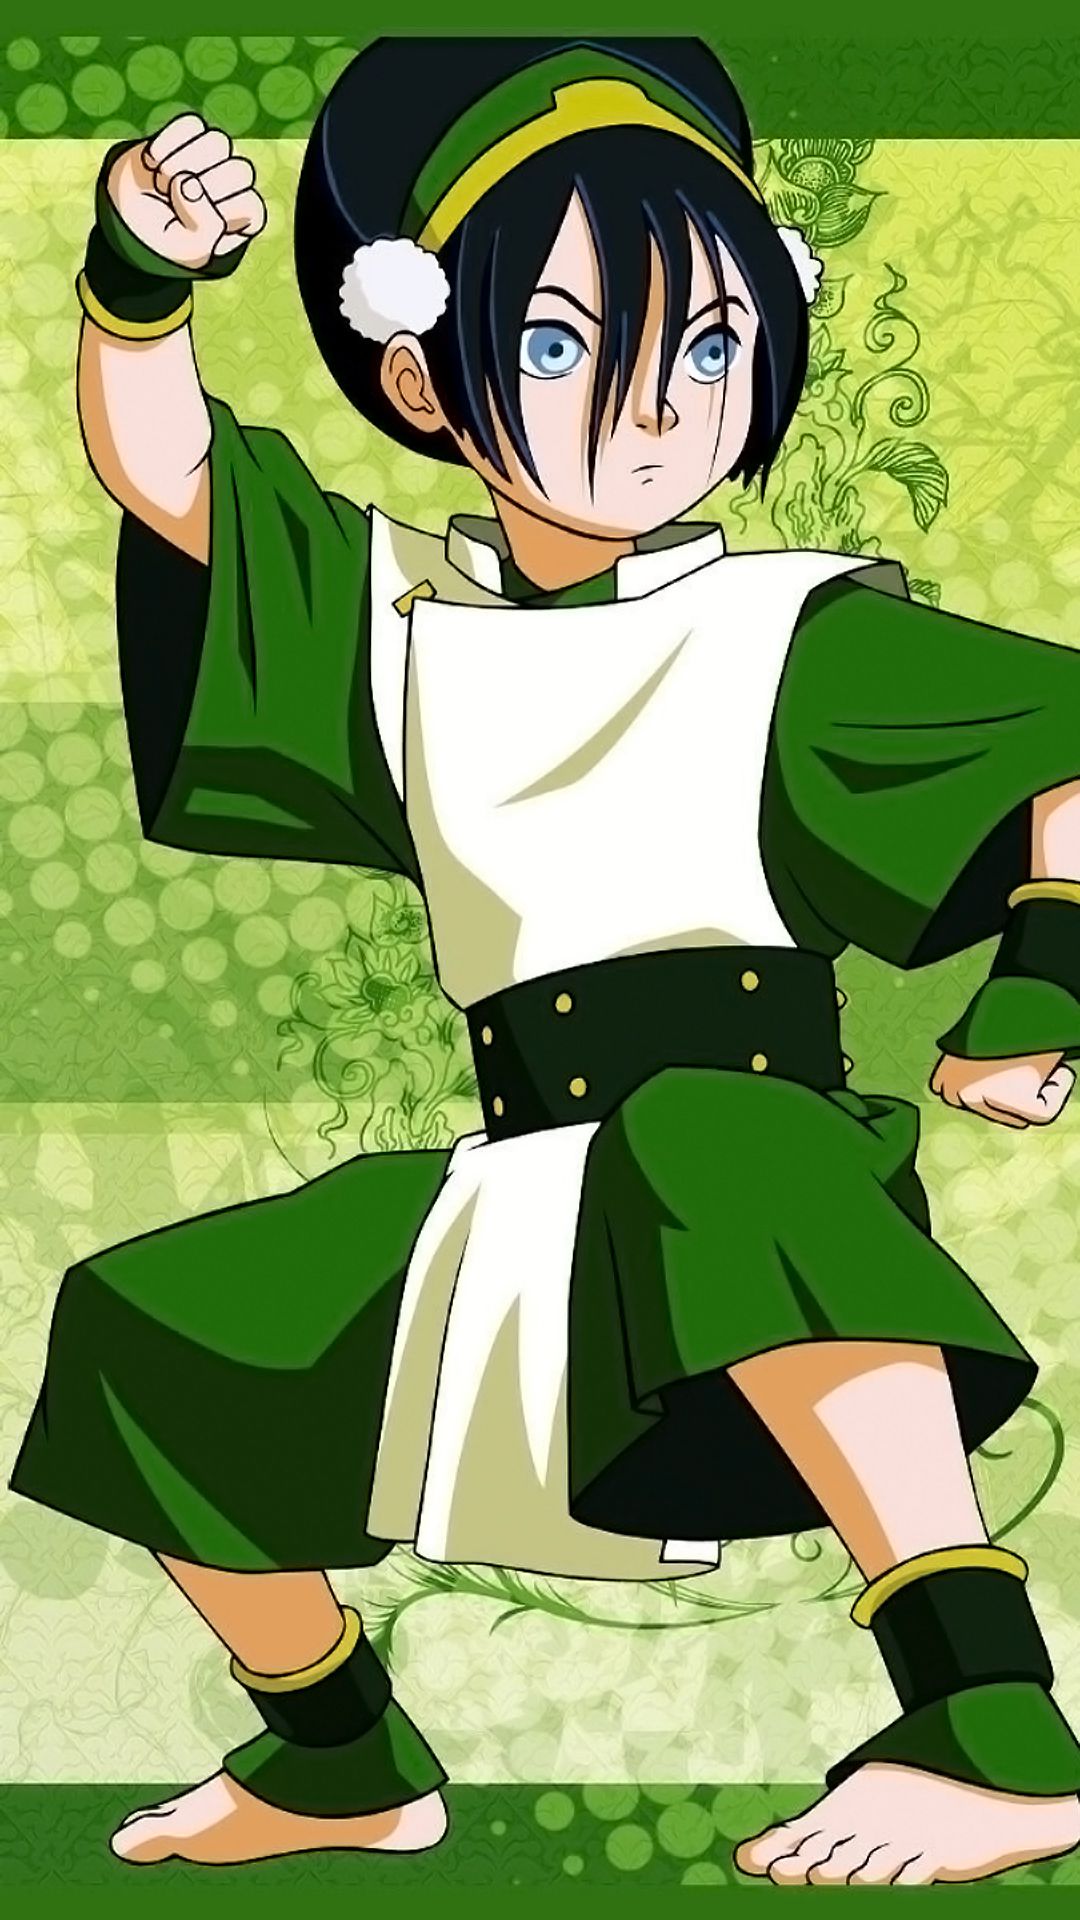 Avatar The Last Airbender Full Hd Wallpaper For Android - Toph Beifong -  1080x1920 Wallpaper 